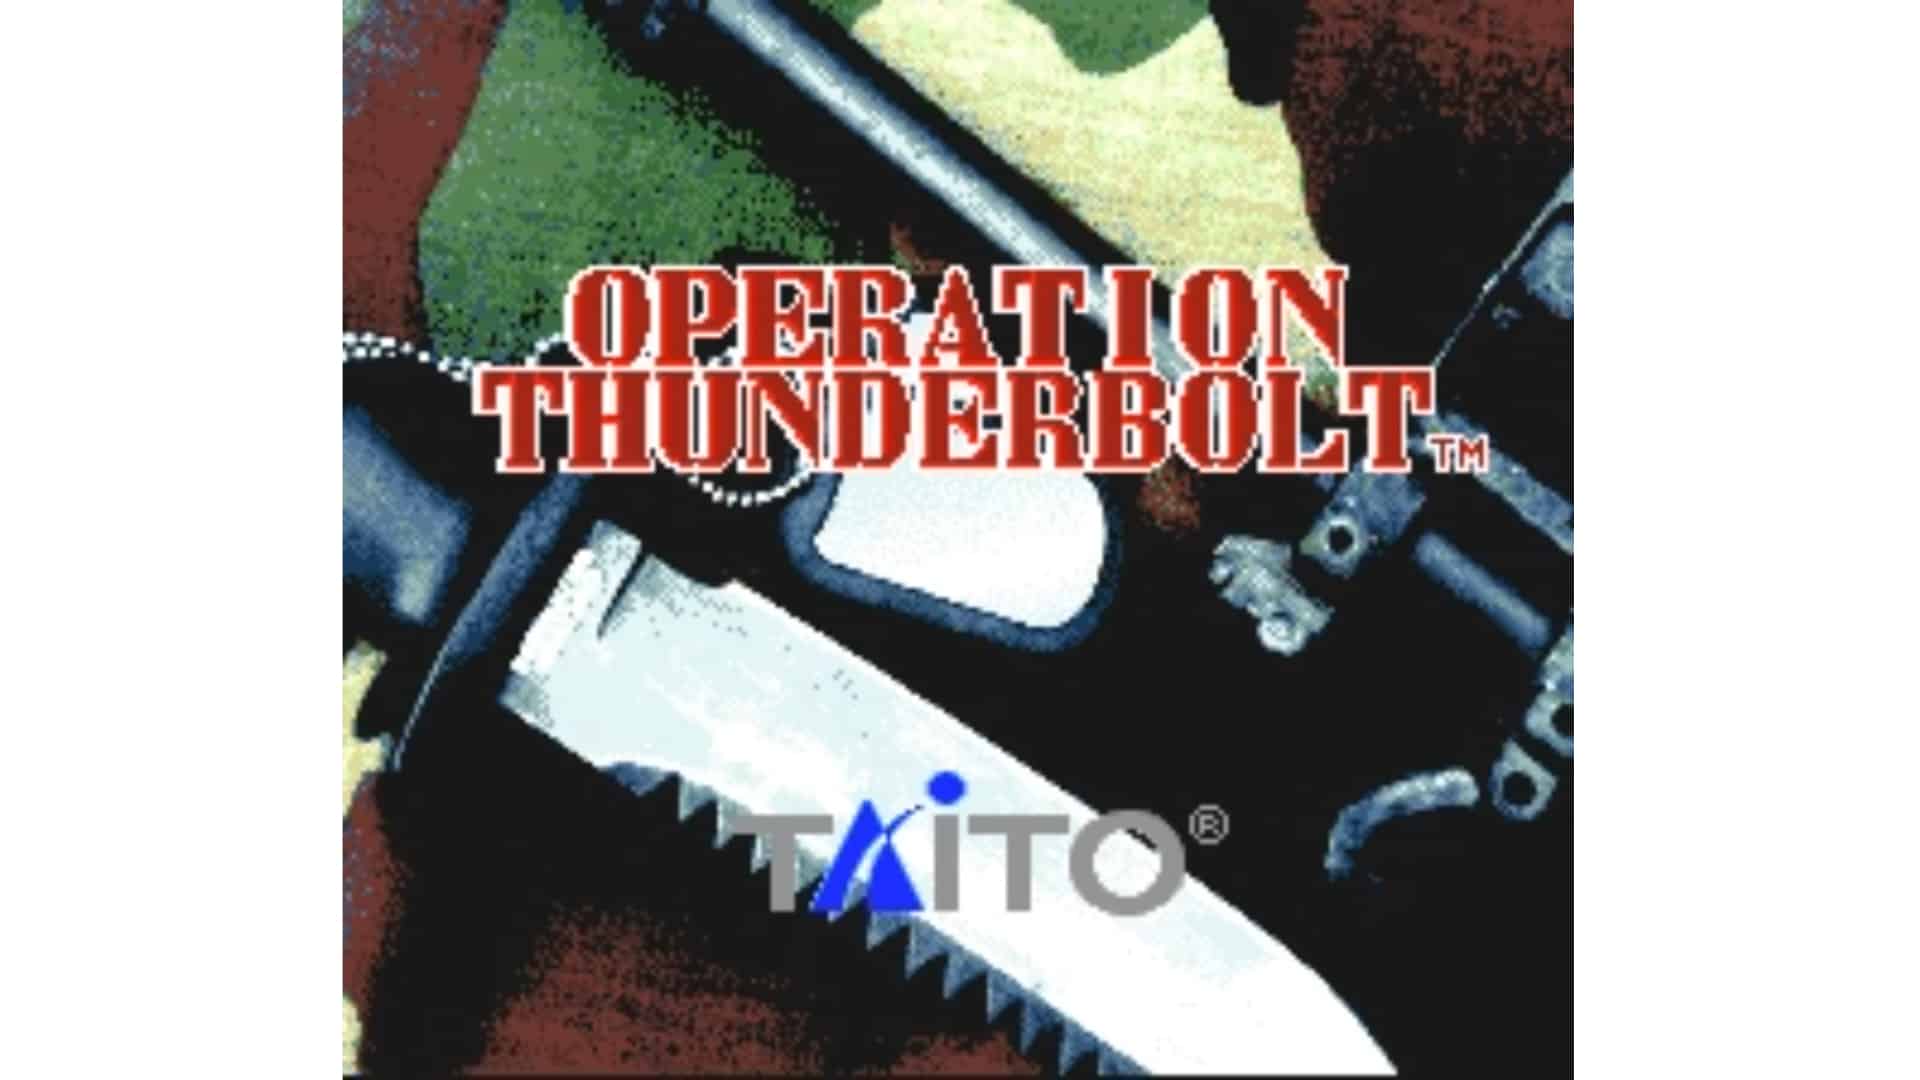 An in-game screenshot from Operation Thunderbolt.